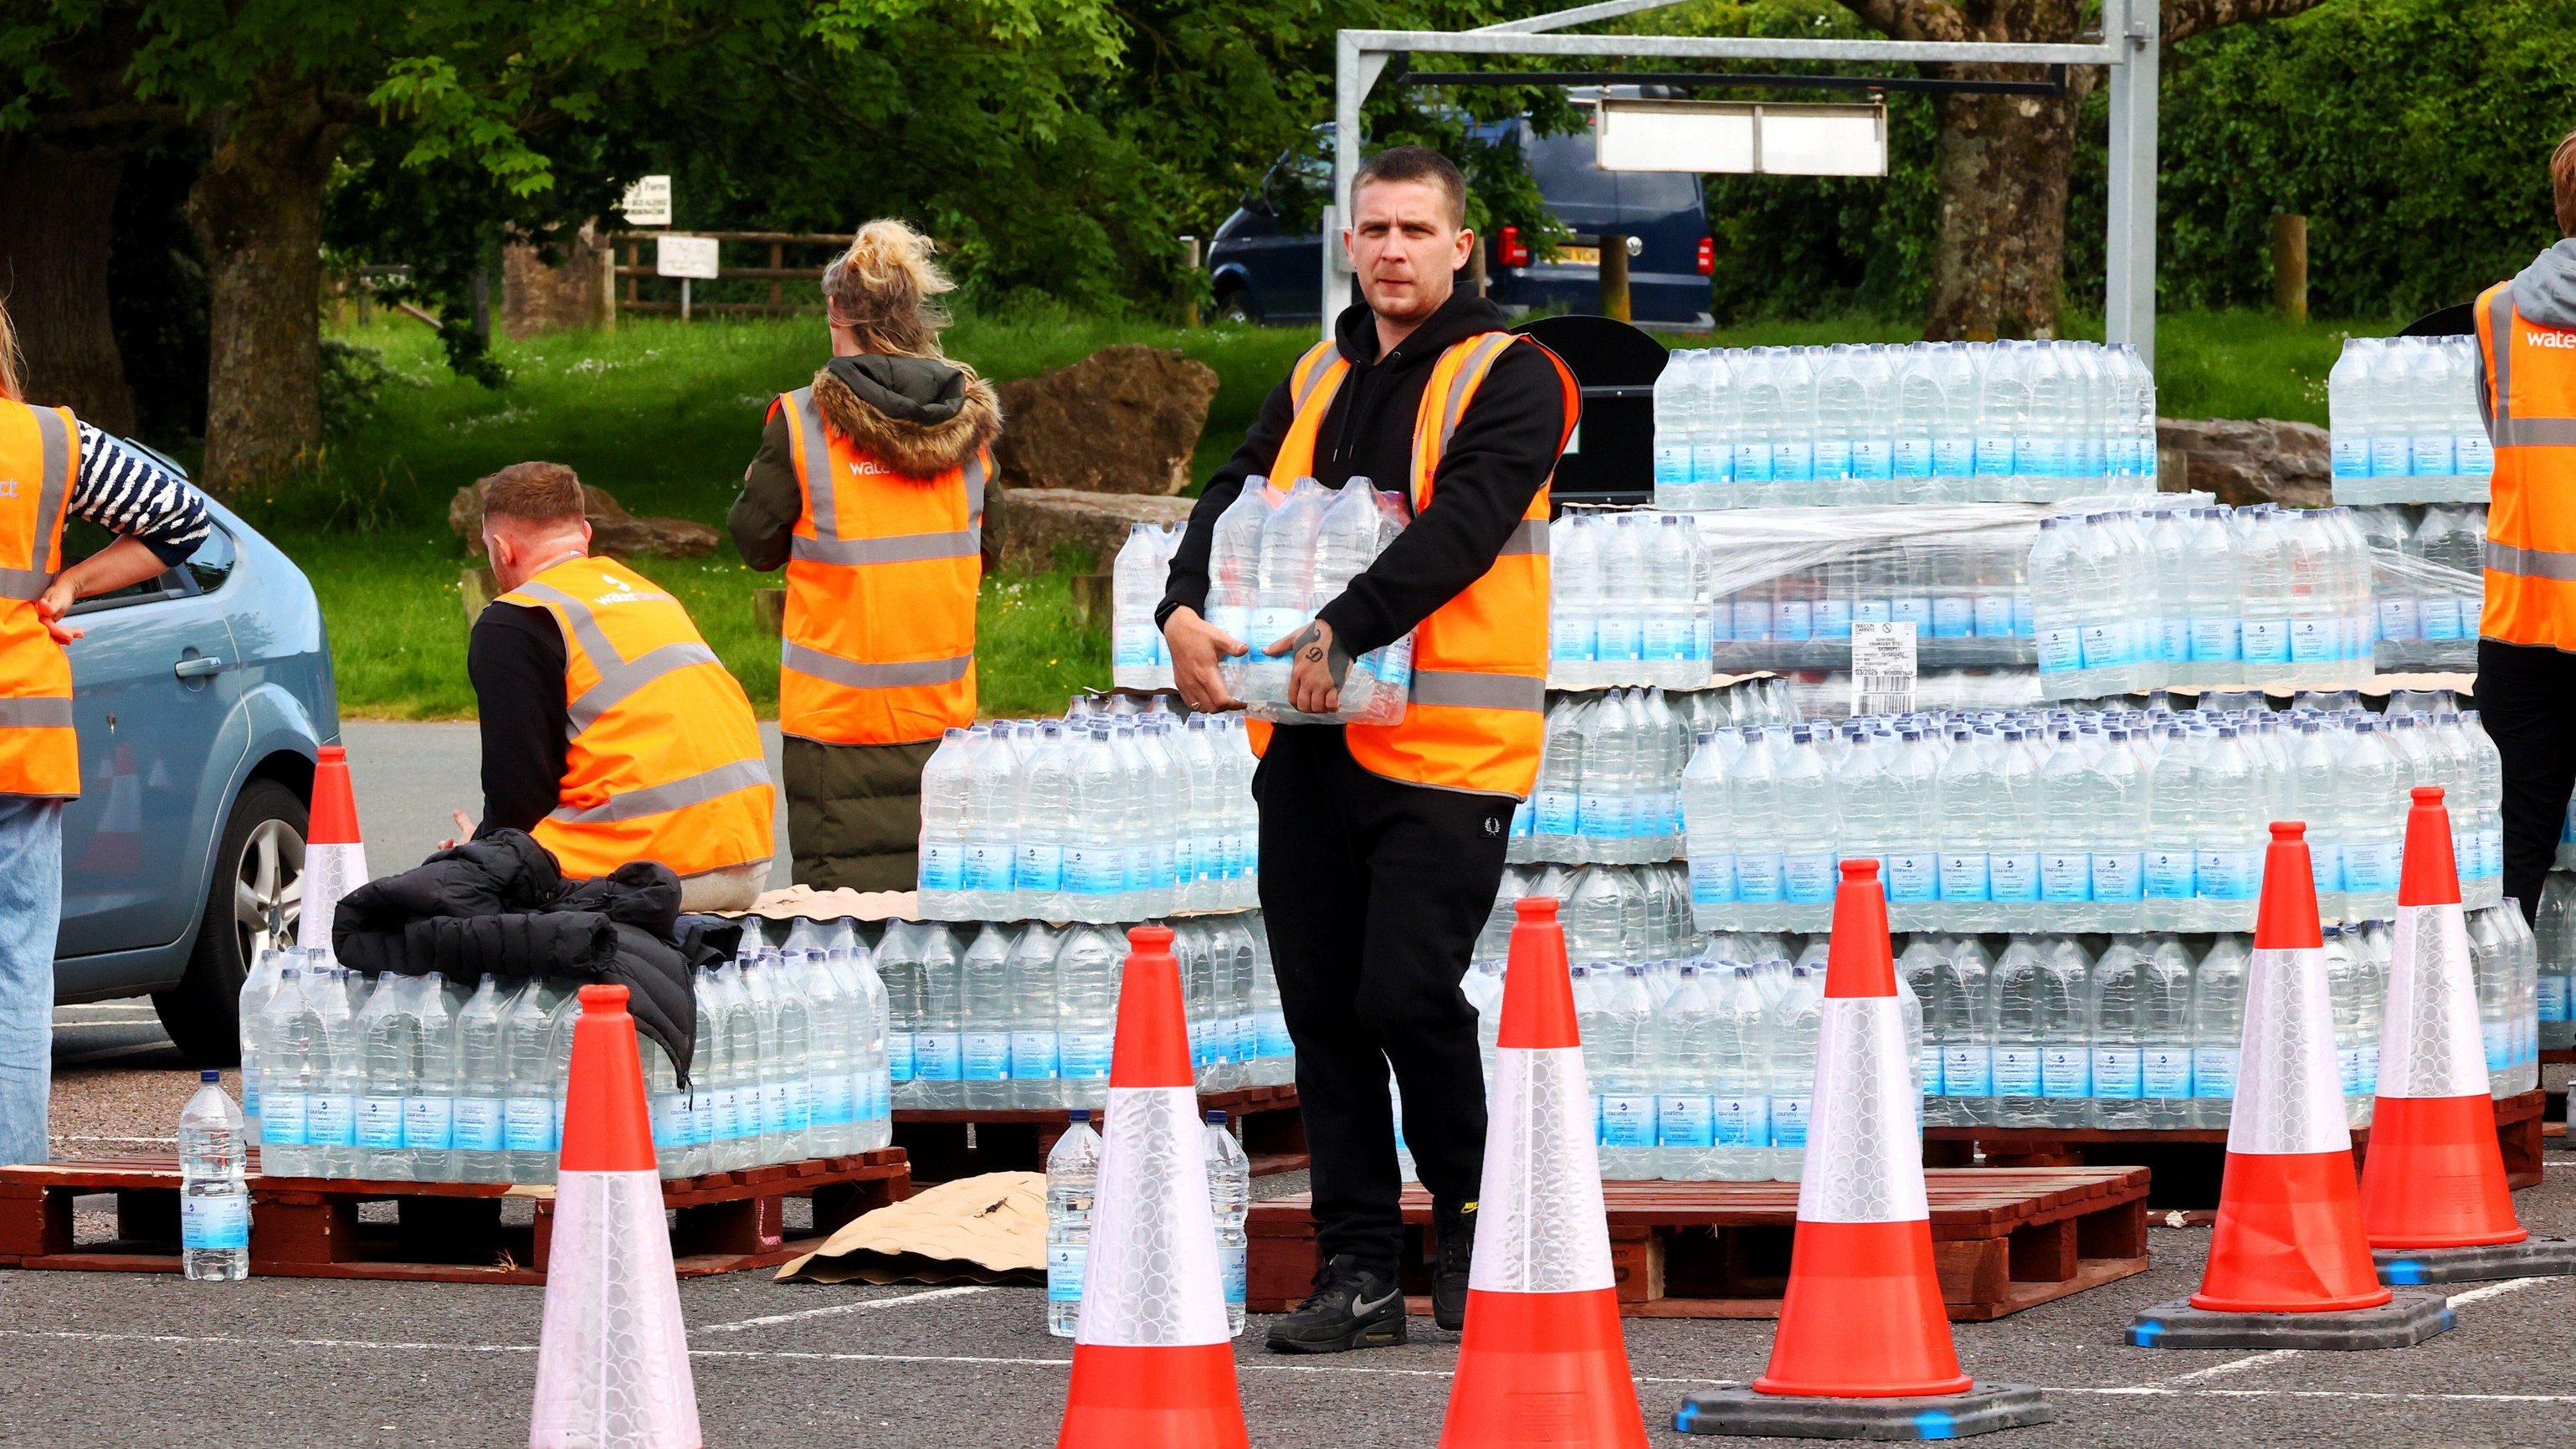 South West Water gave out emergency rations of bottled water to affected customers, leading to mile-long queues